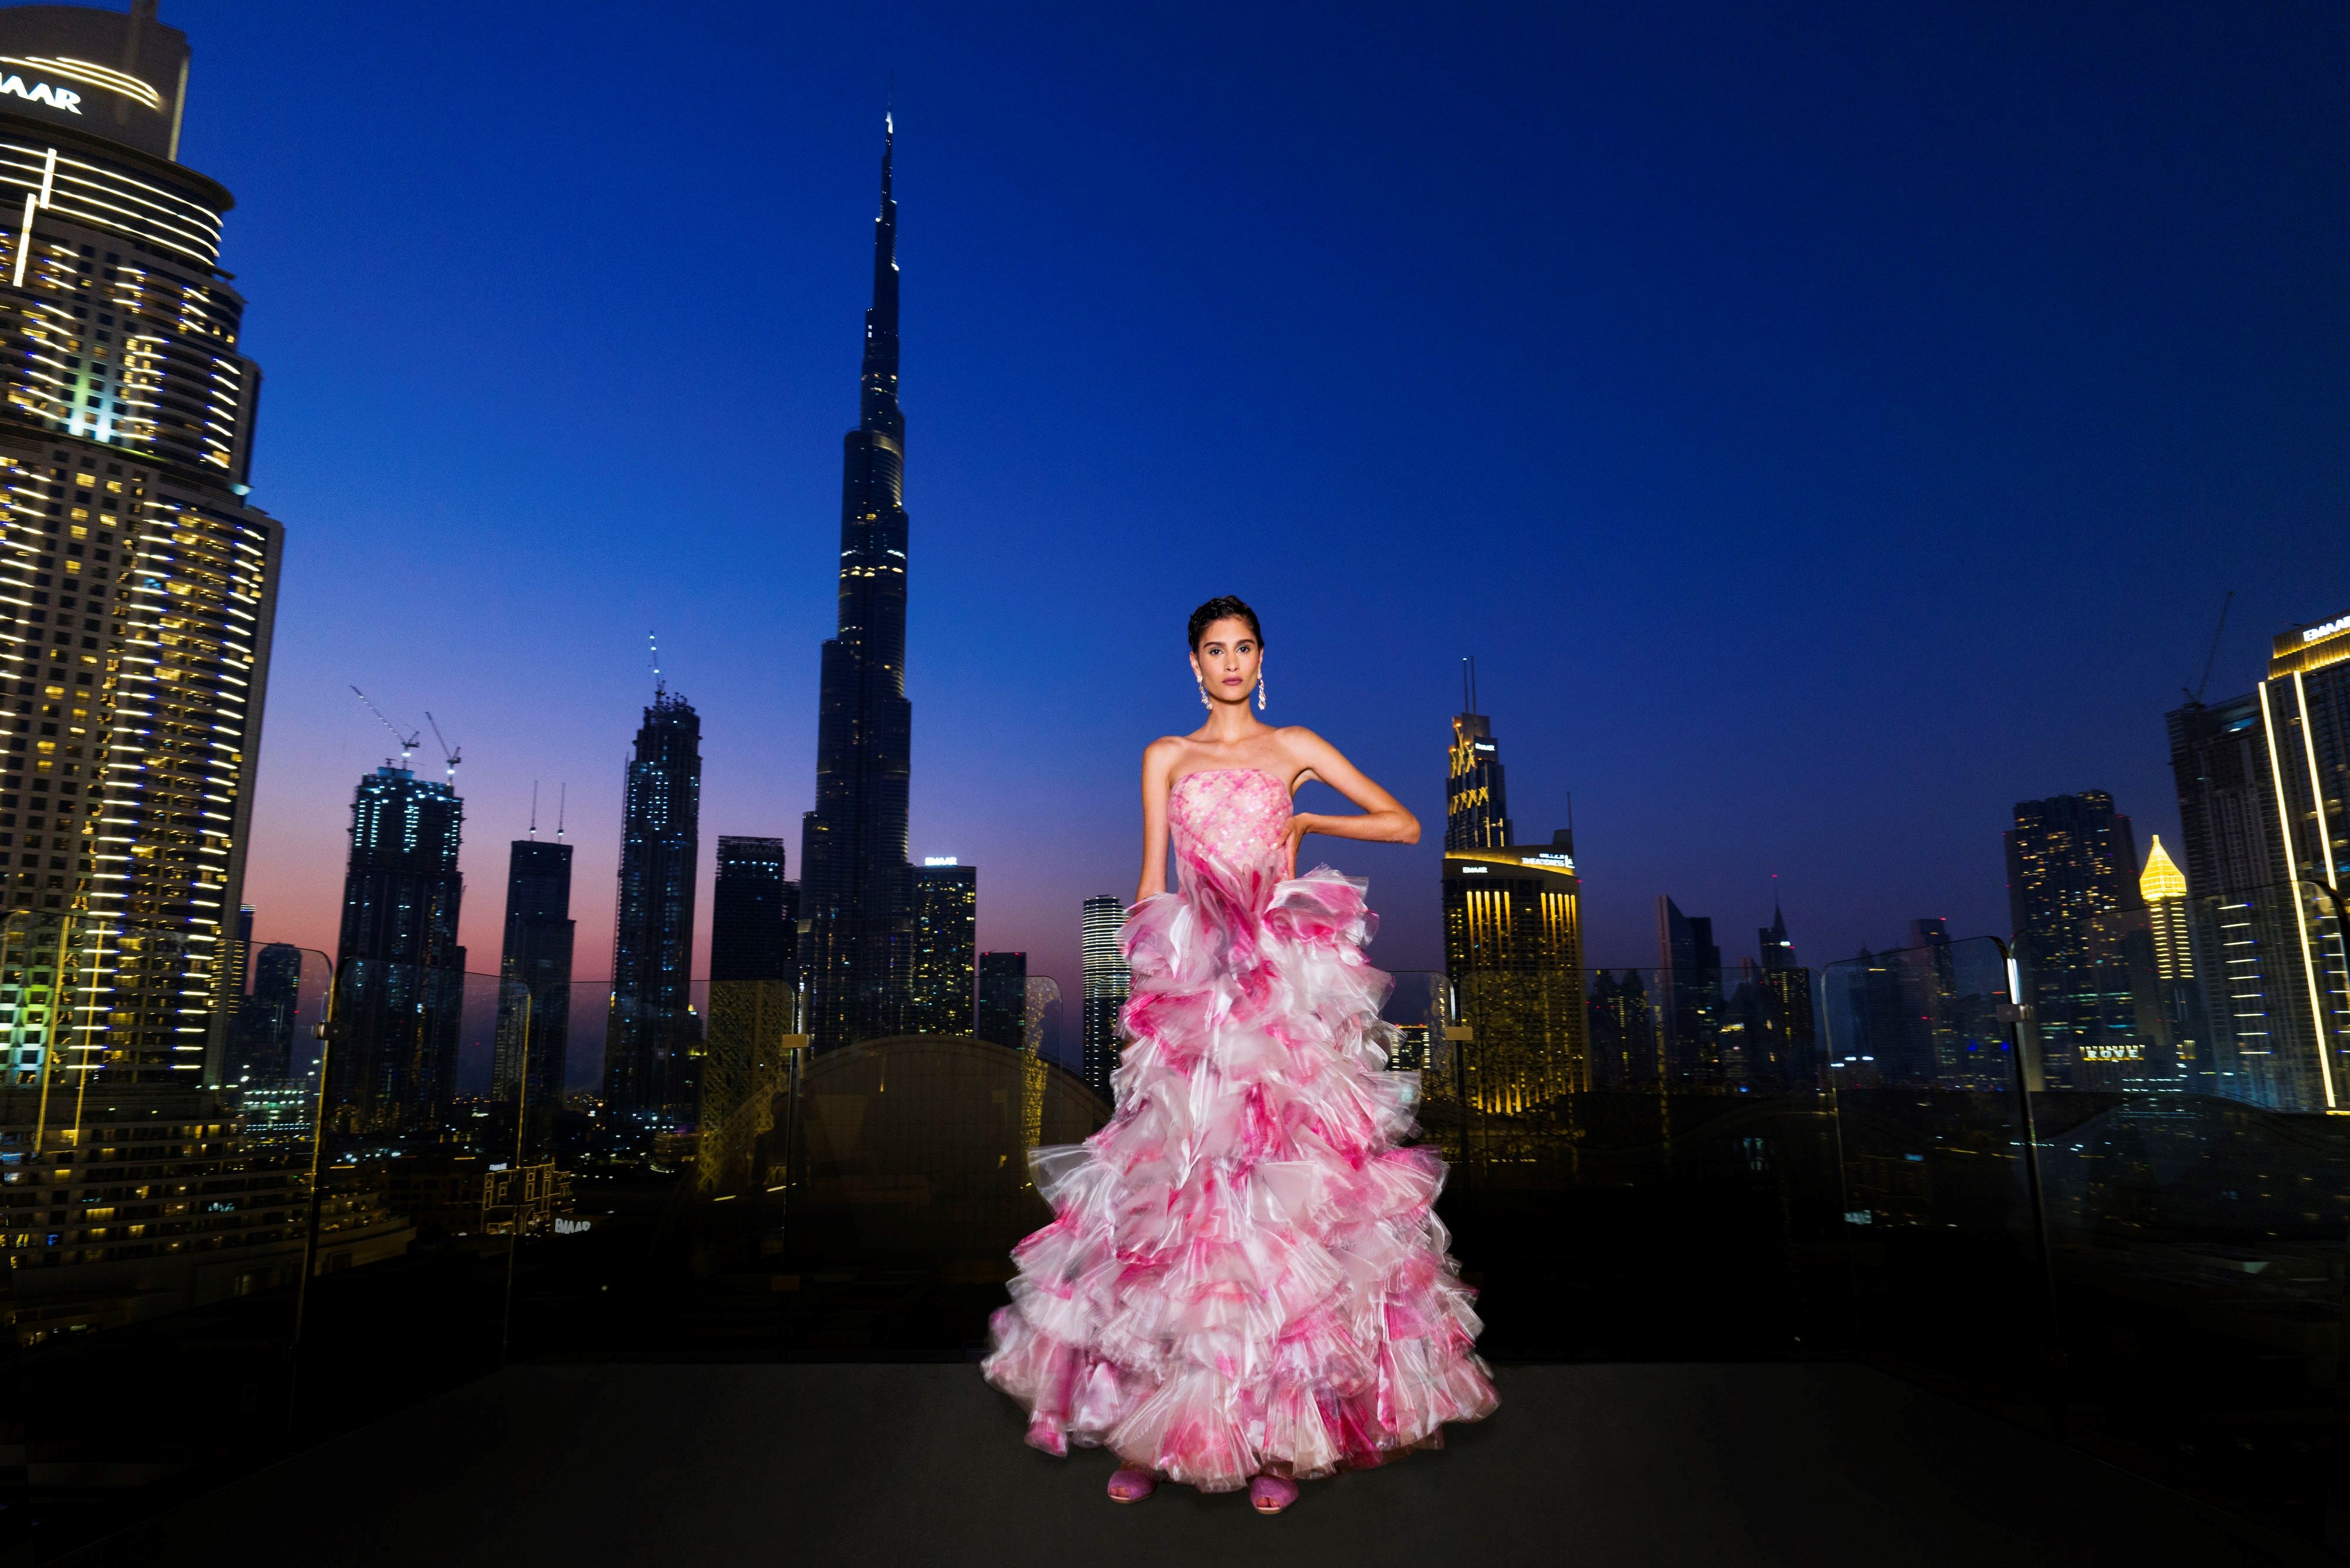 A look from Giorgio Armani shown during a fashion extravaganza named “One Night Only” in Dubai in November. The UAE is growing in importance as a luxury destination.